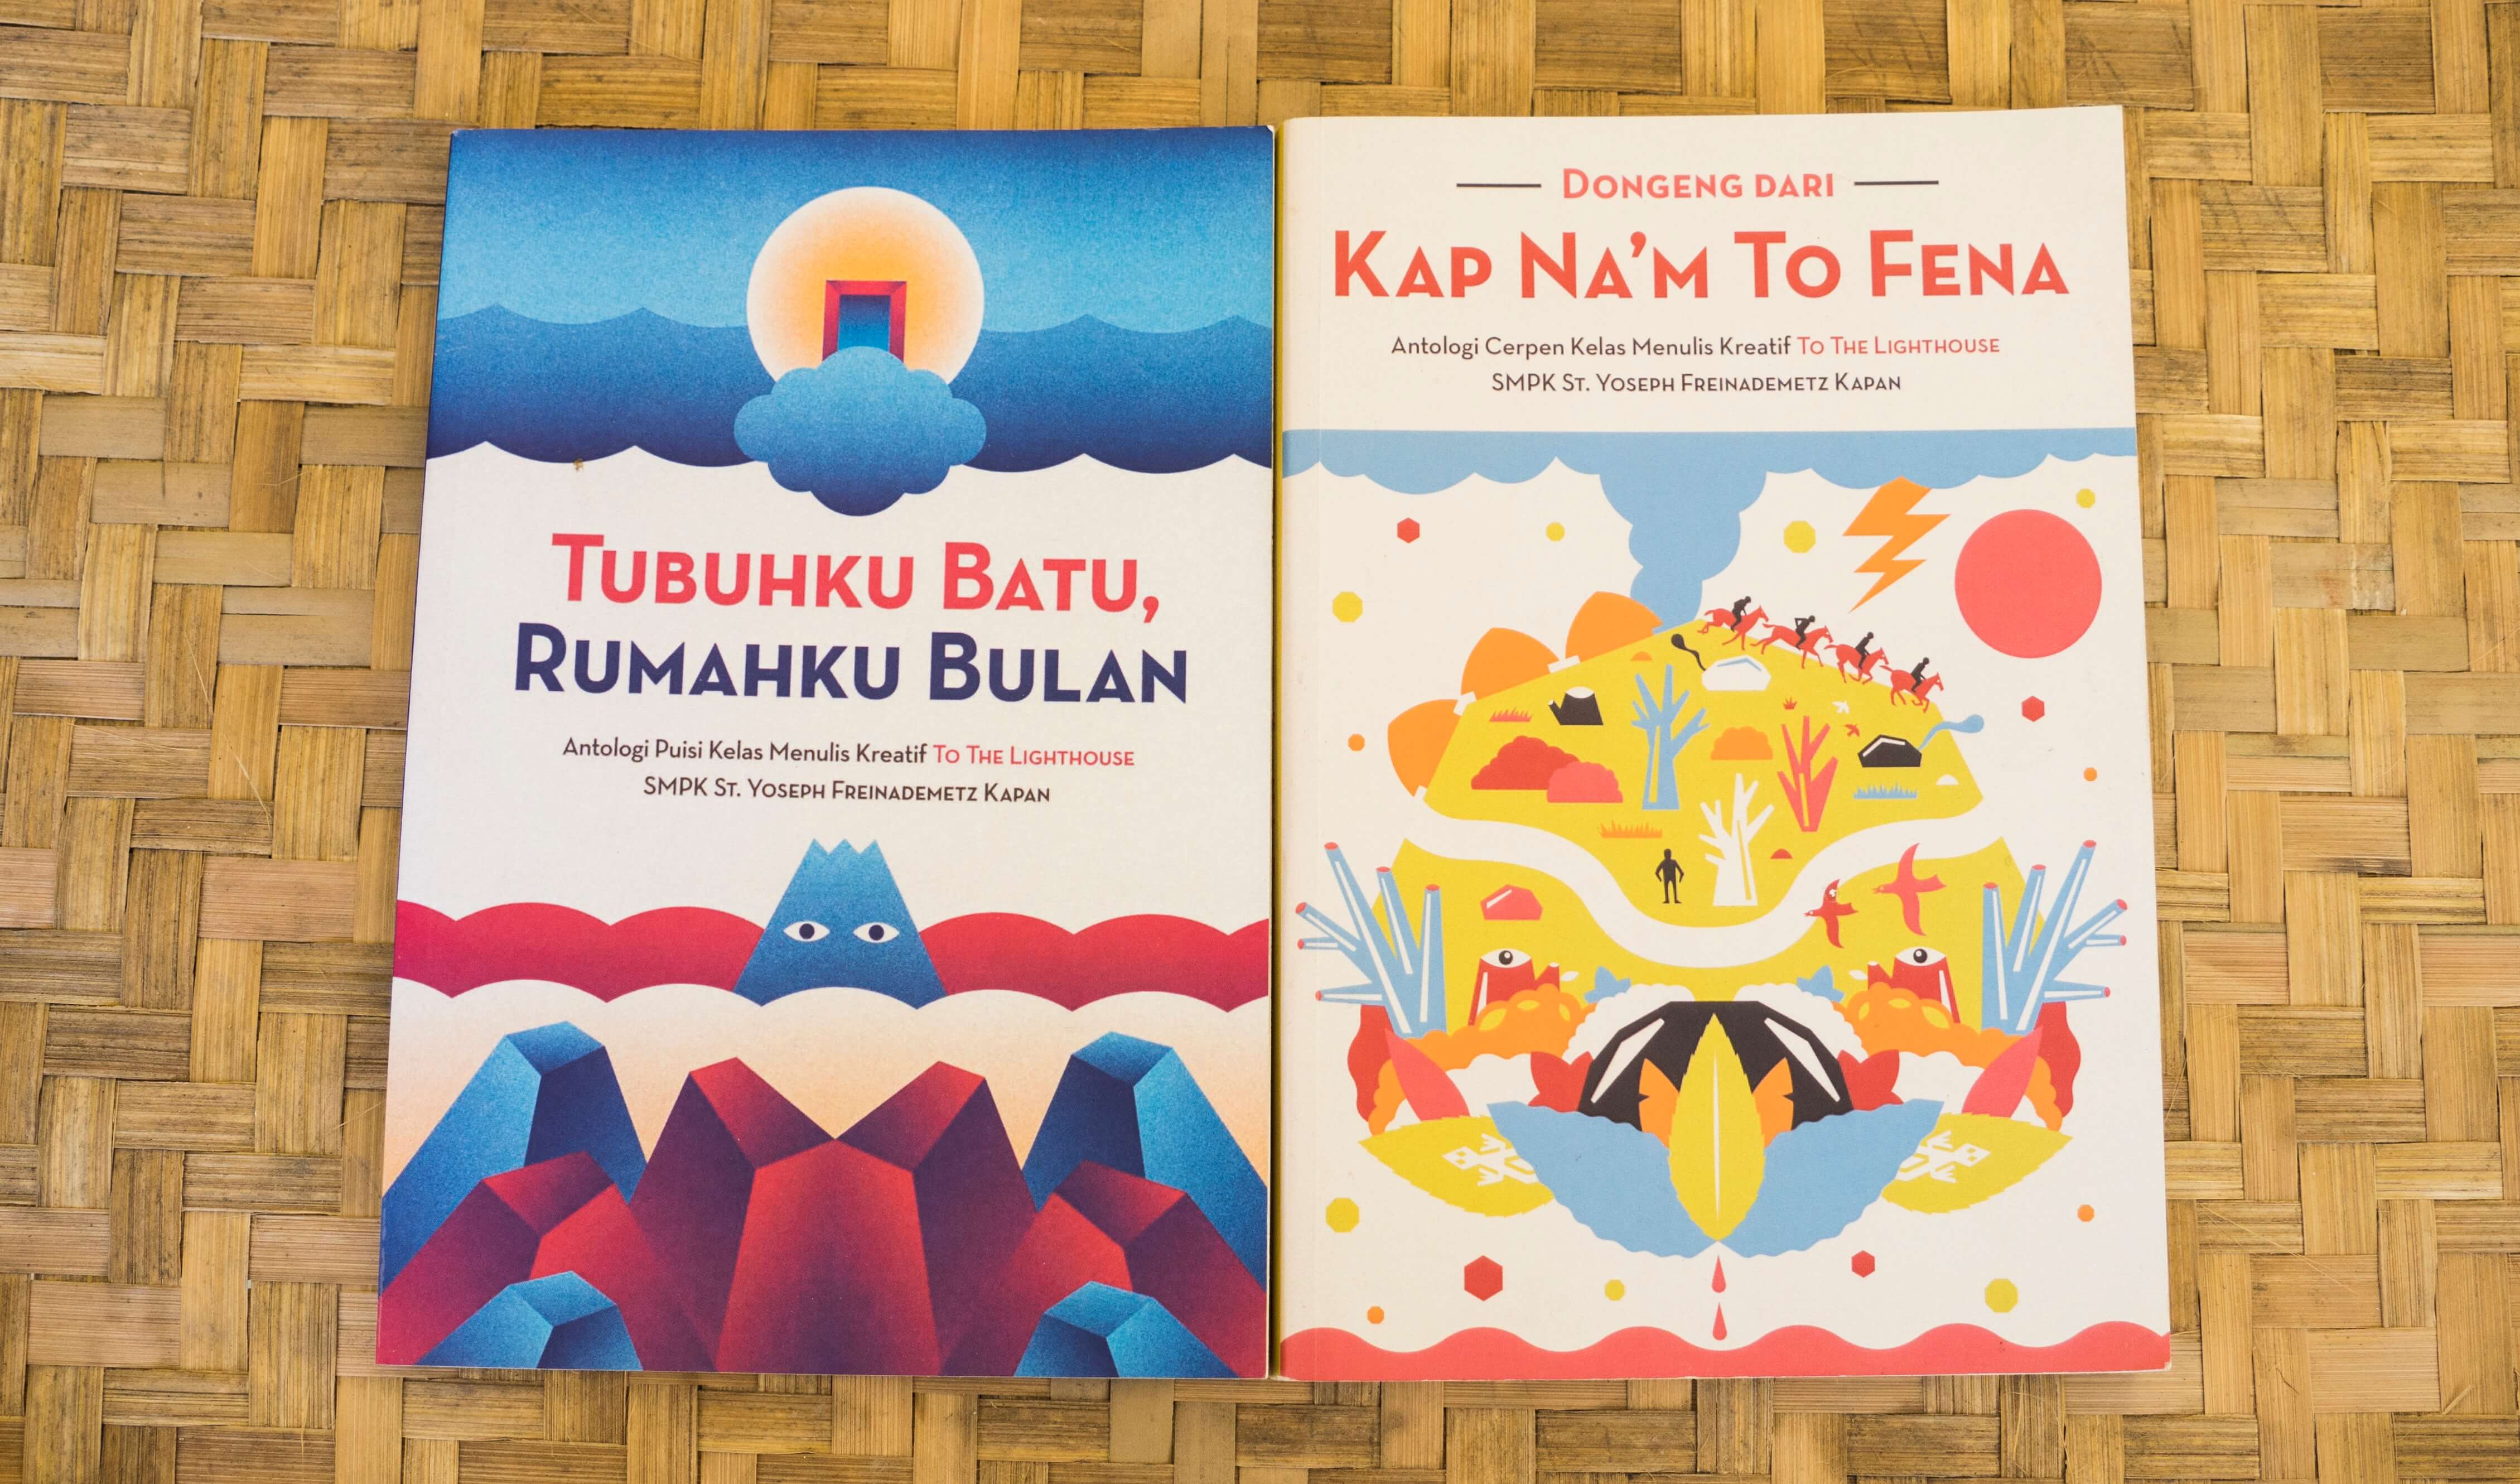 Books published by To the Lighthouse, a local writing club and one of Lakoat.Kujawas’ partners. Tubuhku Batu, Rumahku Bulan (left), is an anthology of poems, and is To The Lighthouse’s second book. Photo by Andra Fembriarto